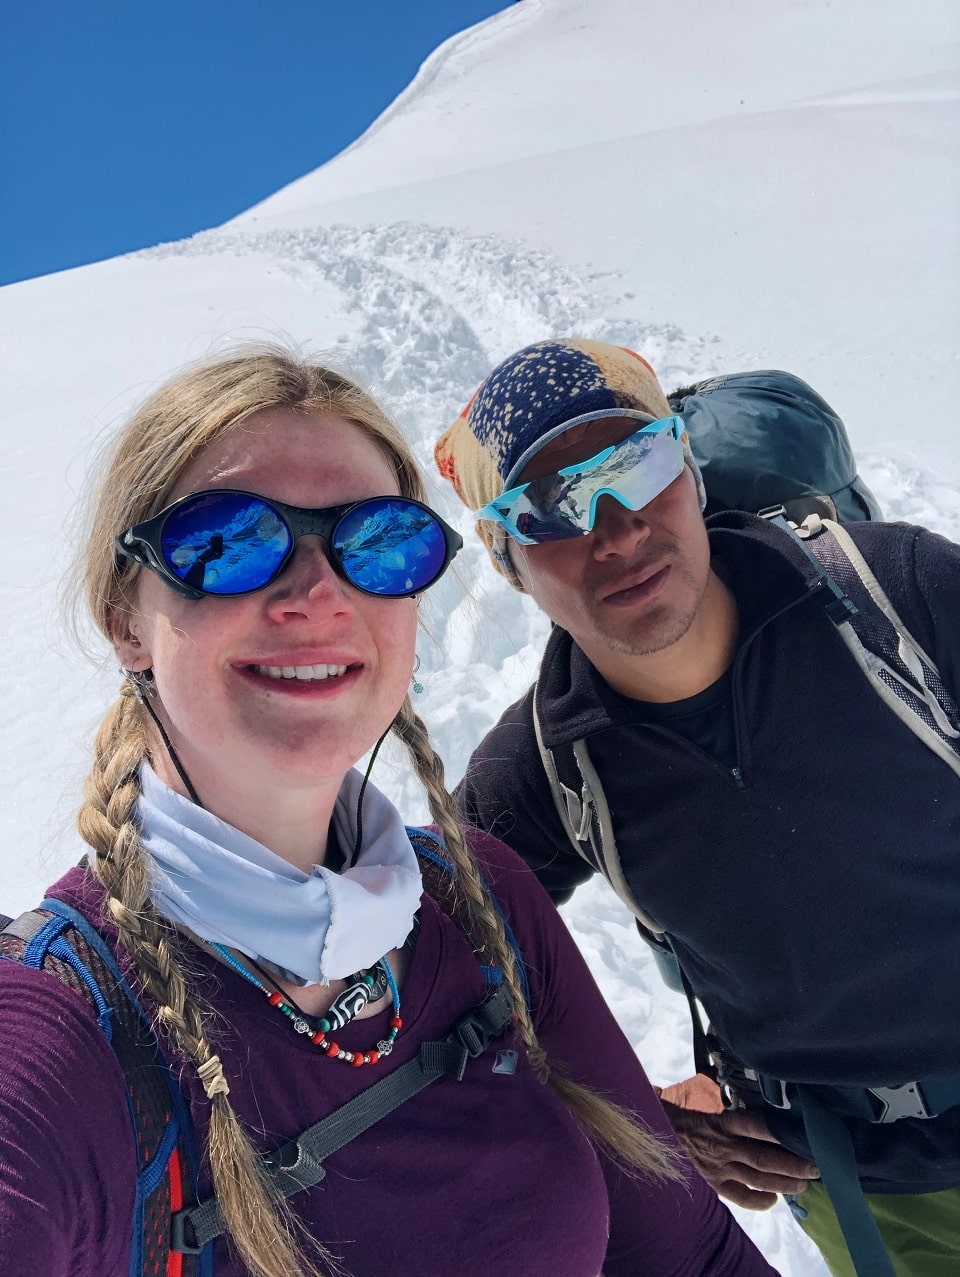 Claire Mackay & Pemba Sherpa on the way to Mera Peak High Camp